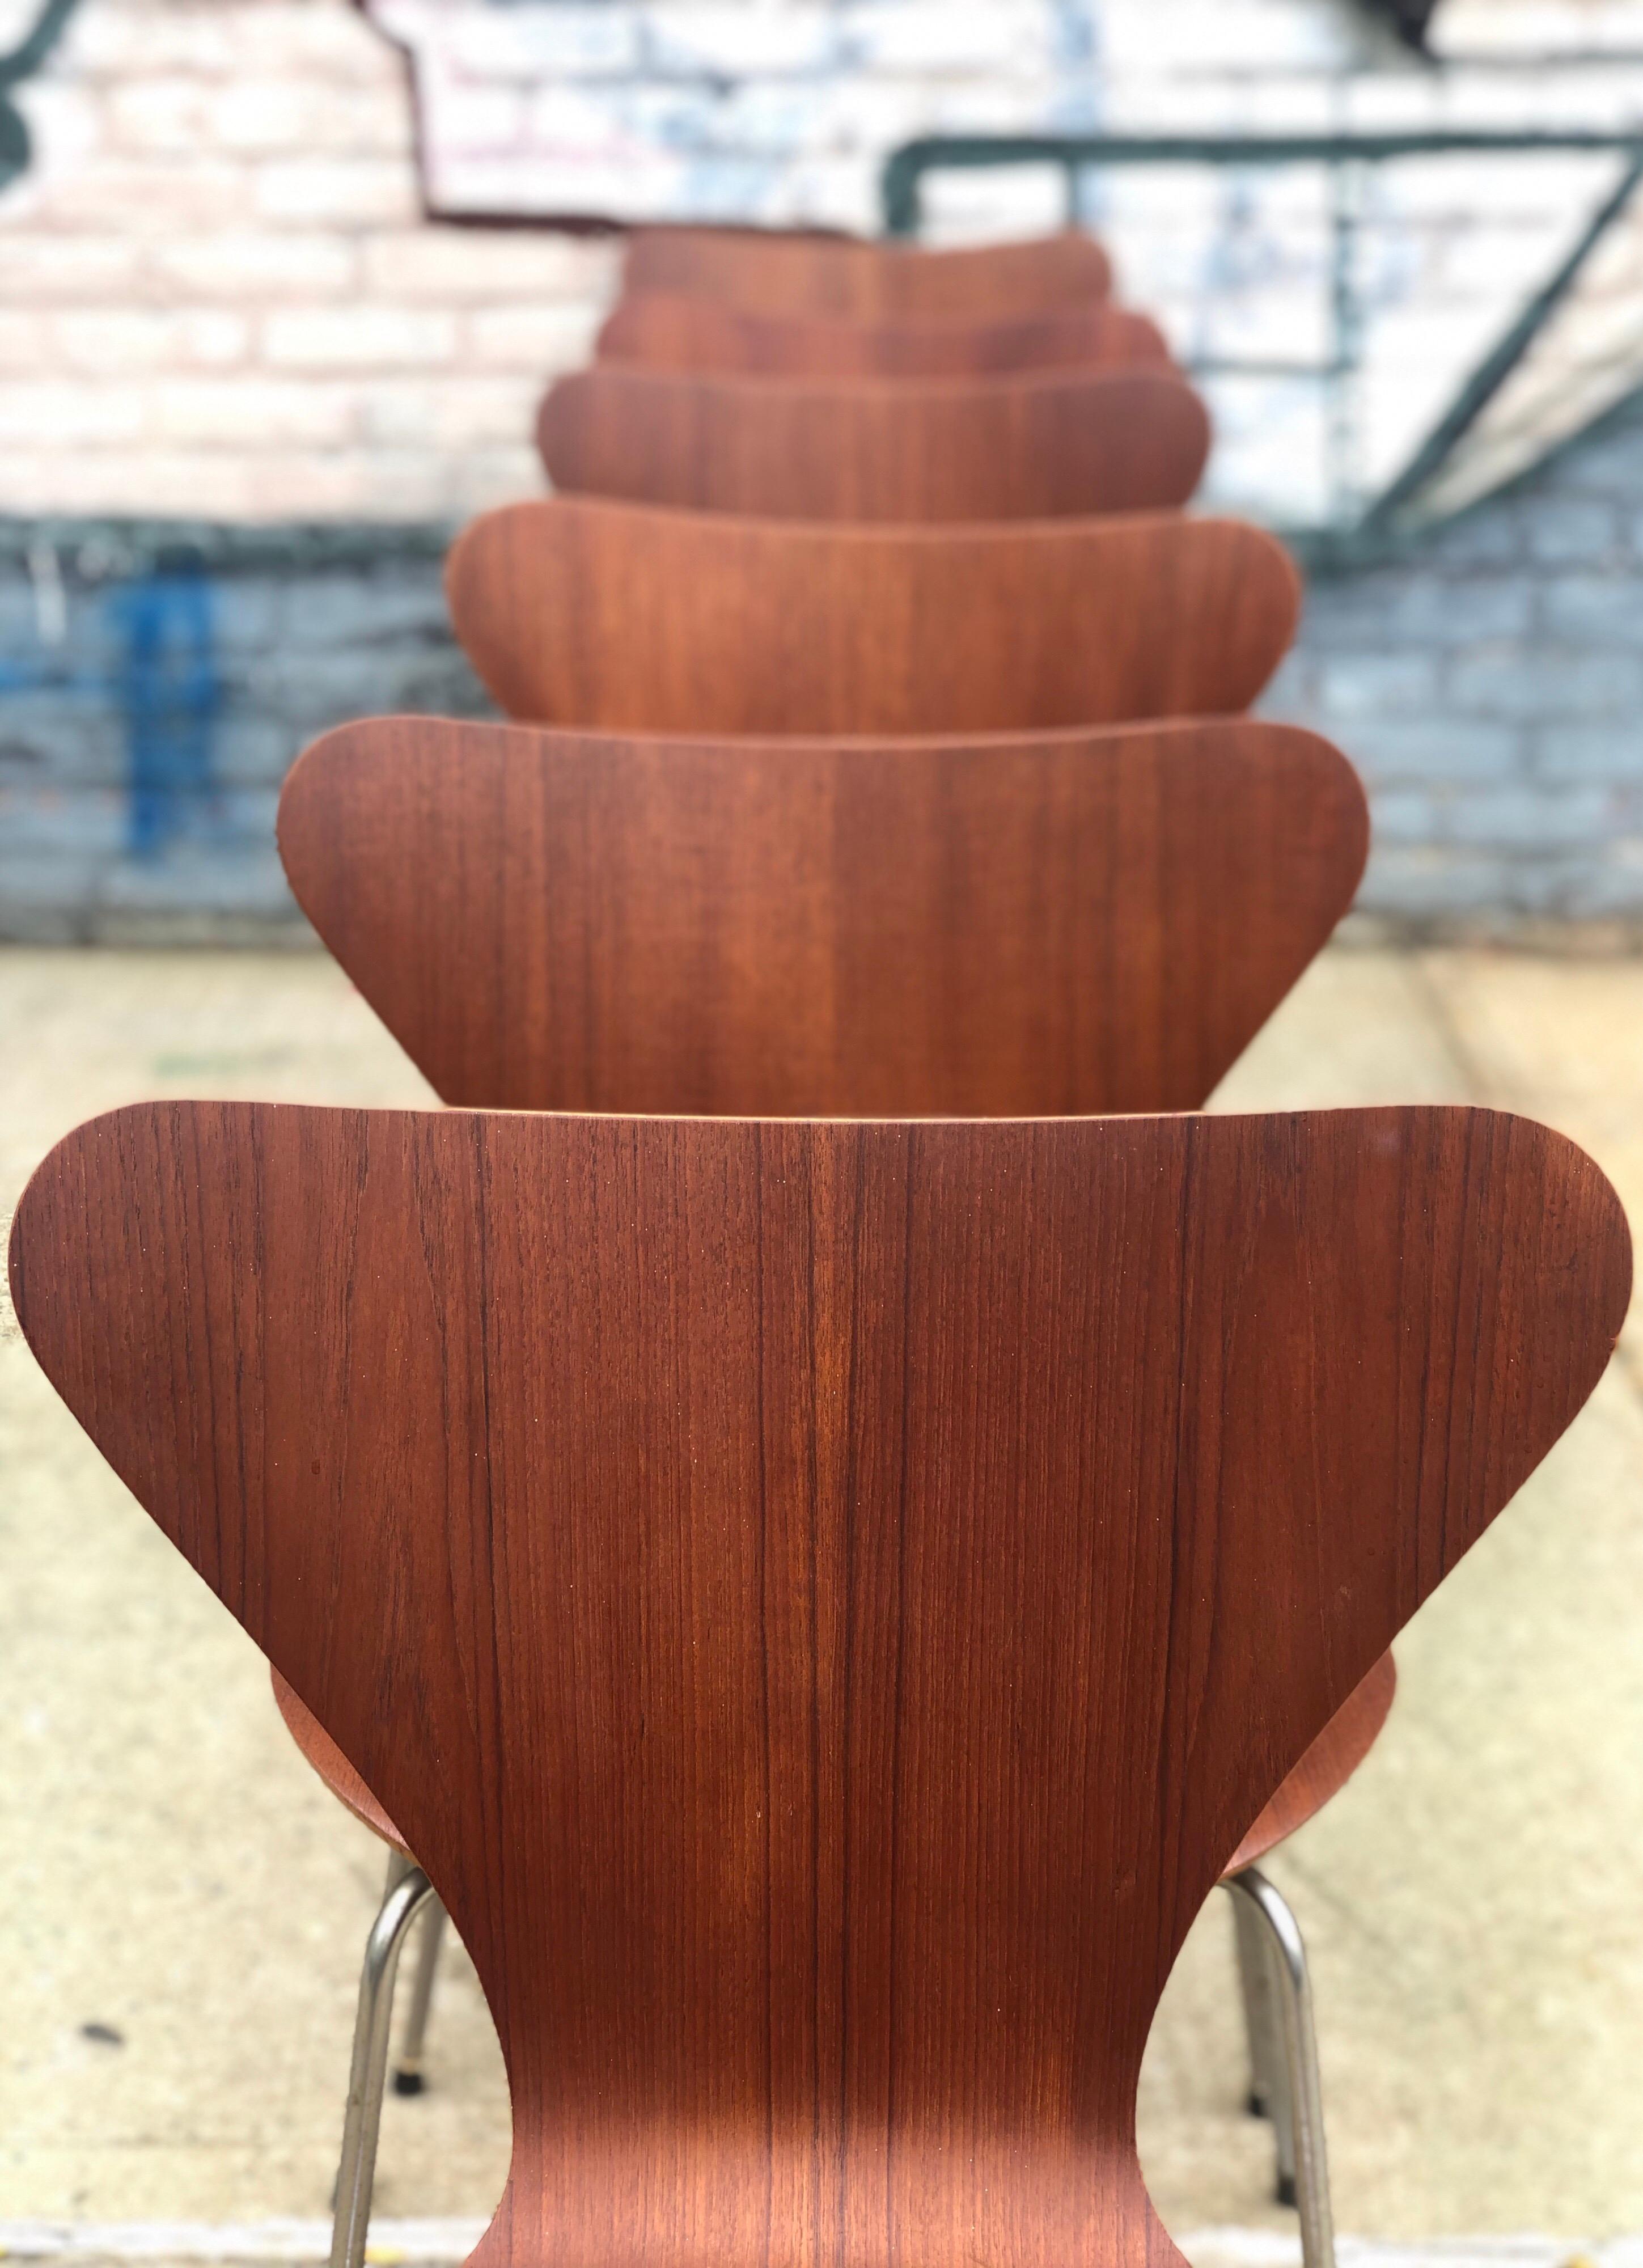 Set of Six Arne Jacobsen Series 7 Chairs in Teak Produced by Fritz Hansen 2